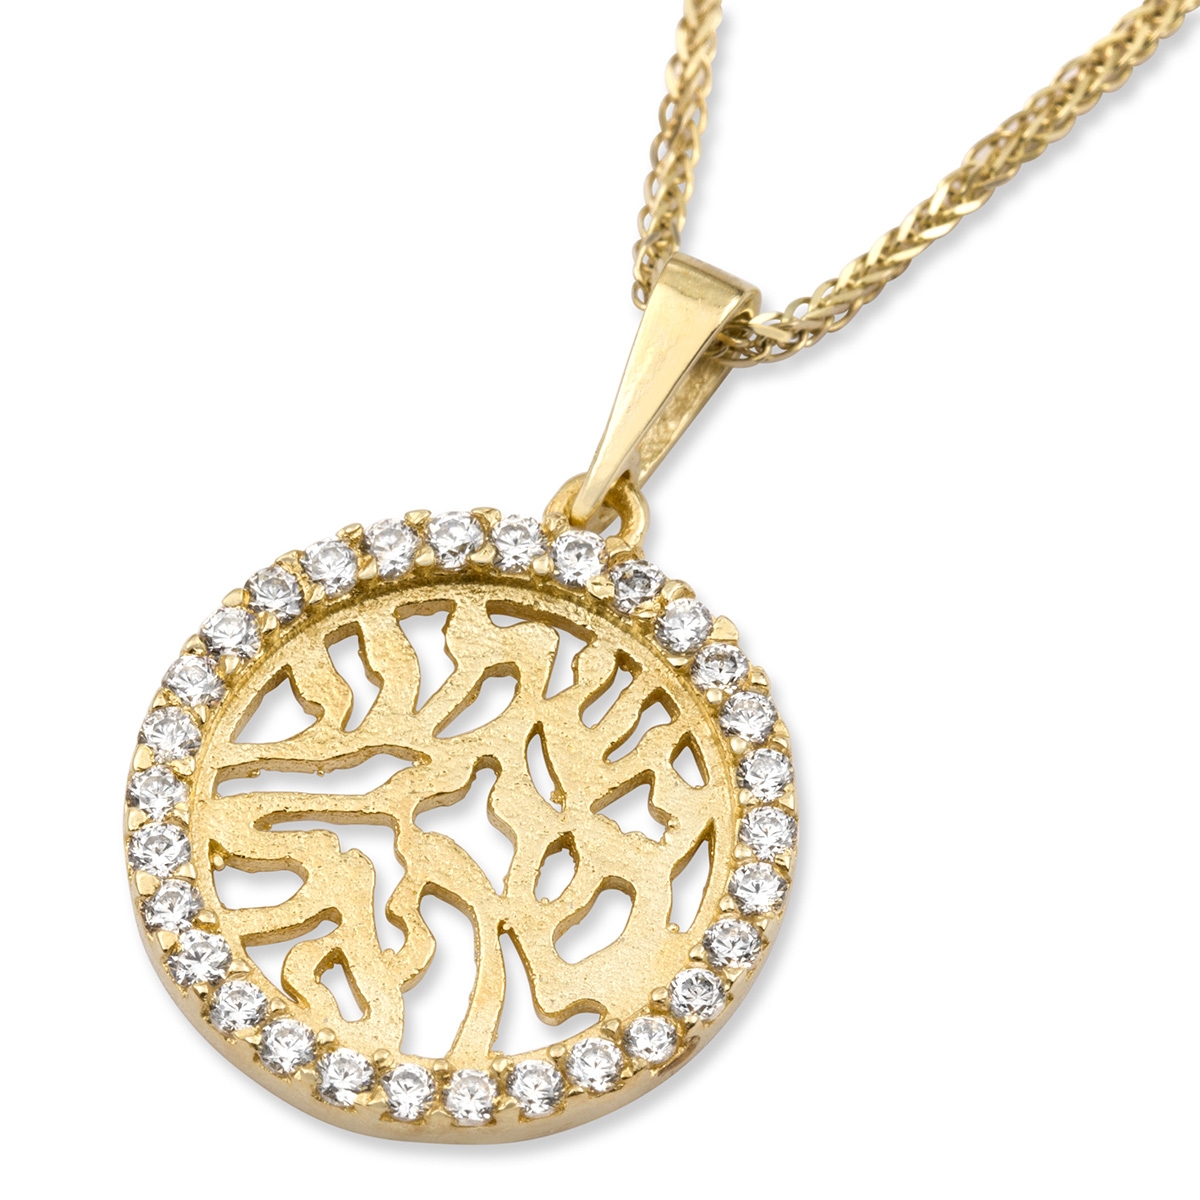 14K Yellow Gold and Cubic Zirconia Shema Yisrael Pendant Necklace - 1